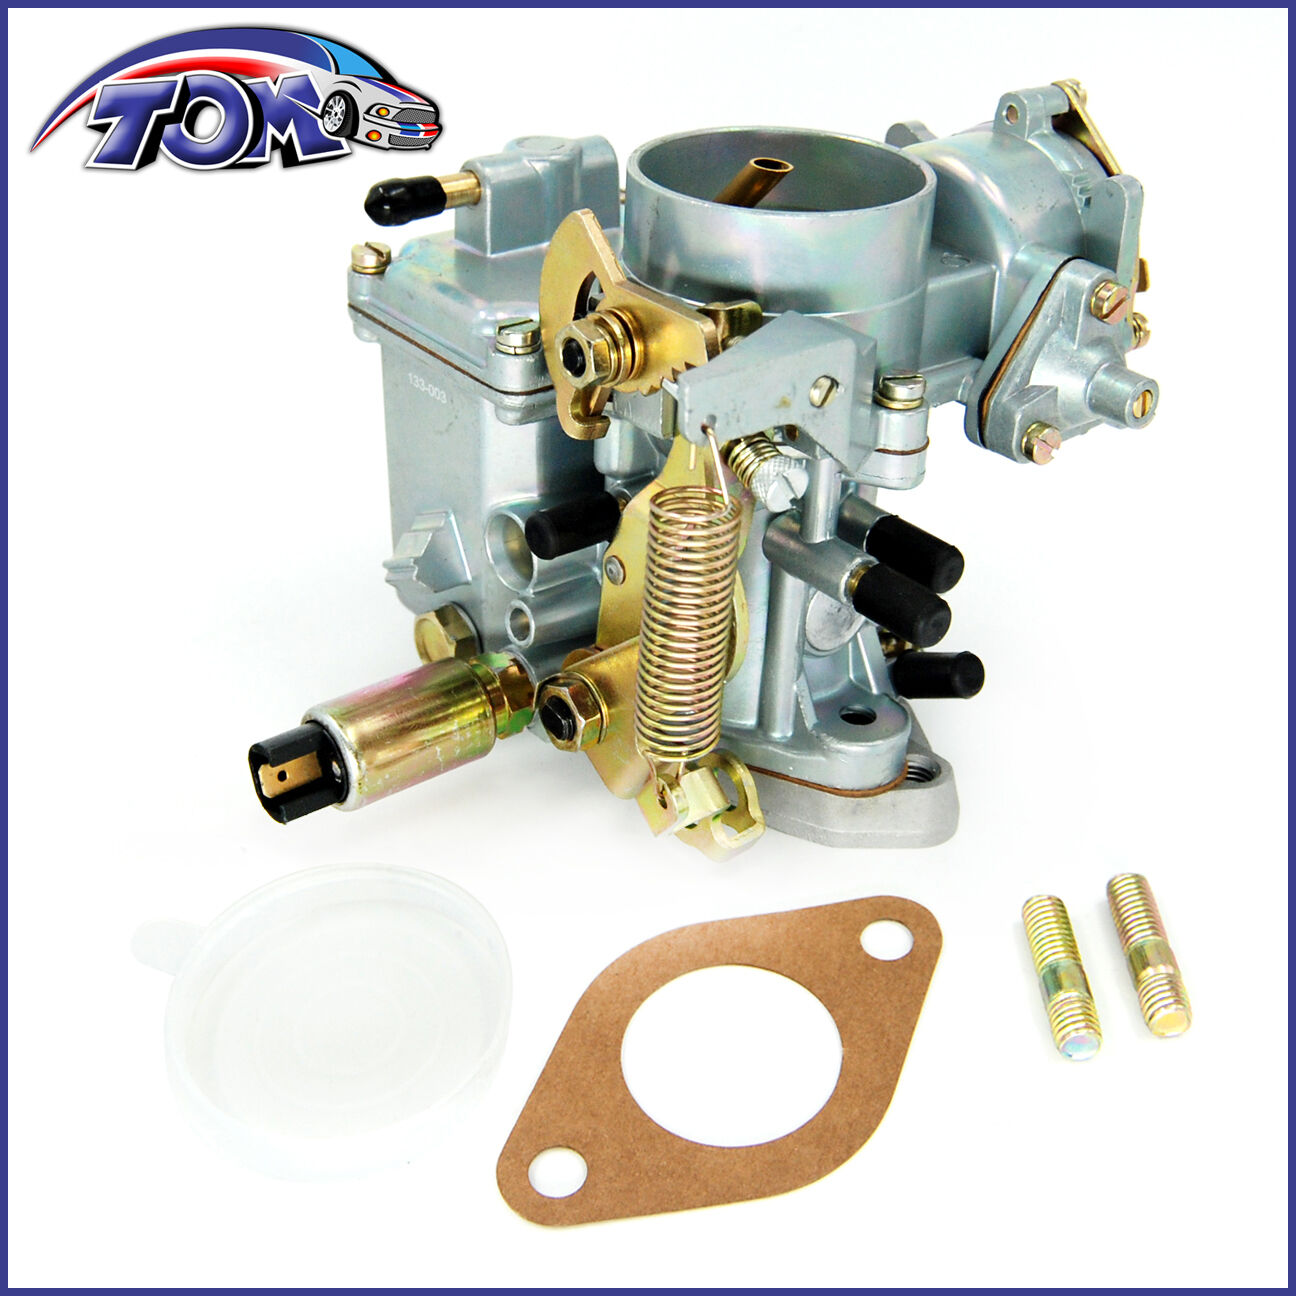 New Carburetor For VW Beetle 30/31 Pict-3 Type 1&2 Bug Bus Ghia 113129029A